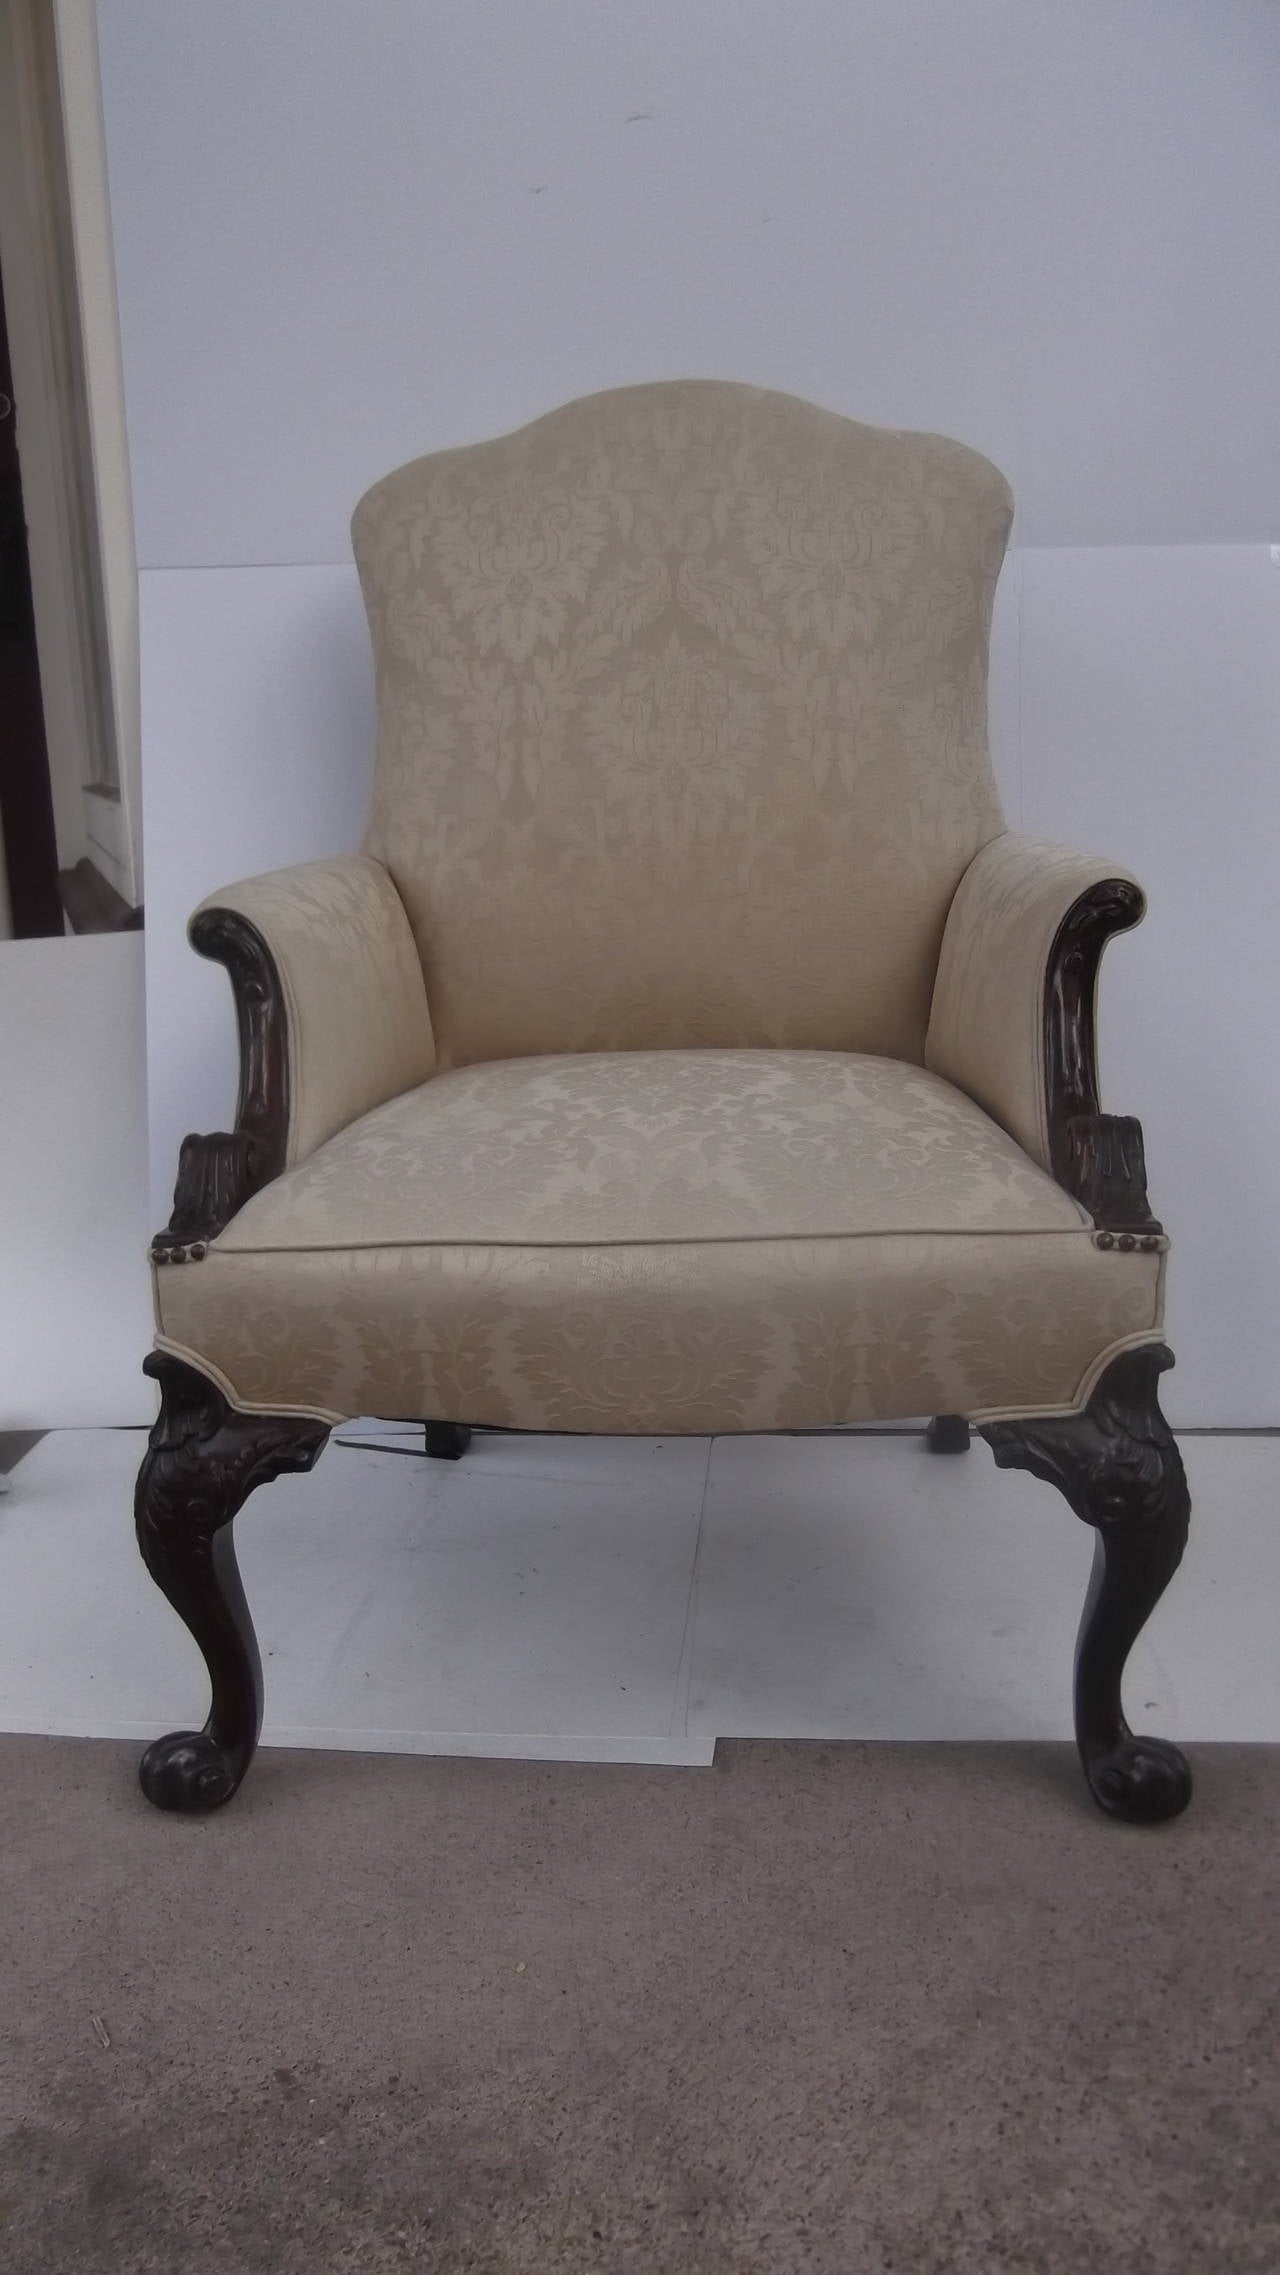 A handsome Georgian style library chair.
Beautifully carved solid mahogany legs with carved details on the arms.
The fabric is a woven damask pattern, recent upholstery but can easily be changed to suit the next owners needs.  Very sturdy hardwood